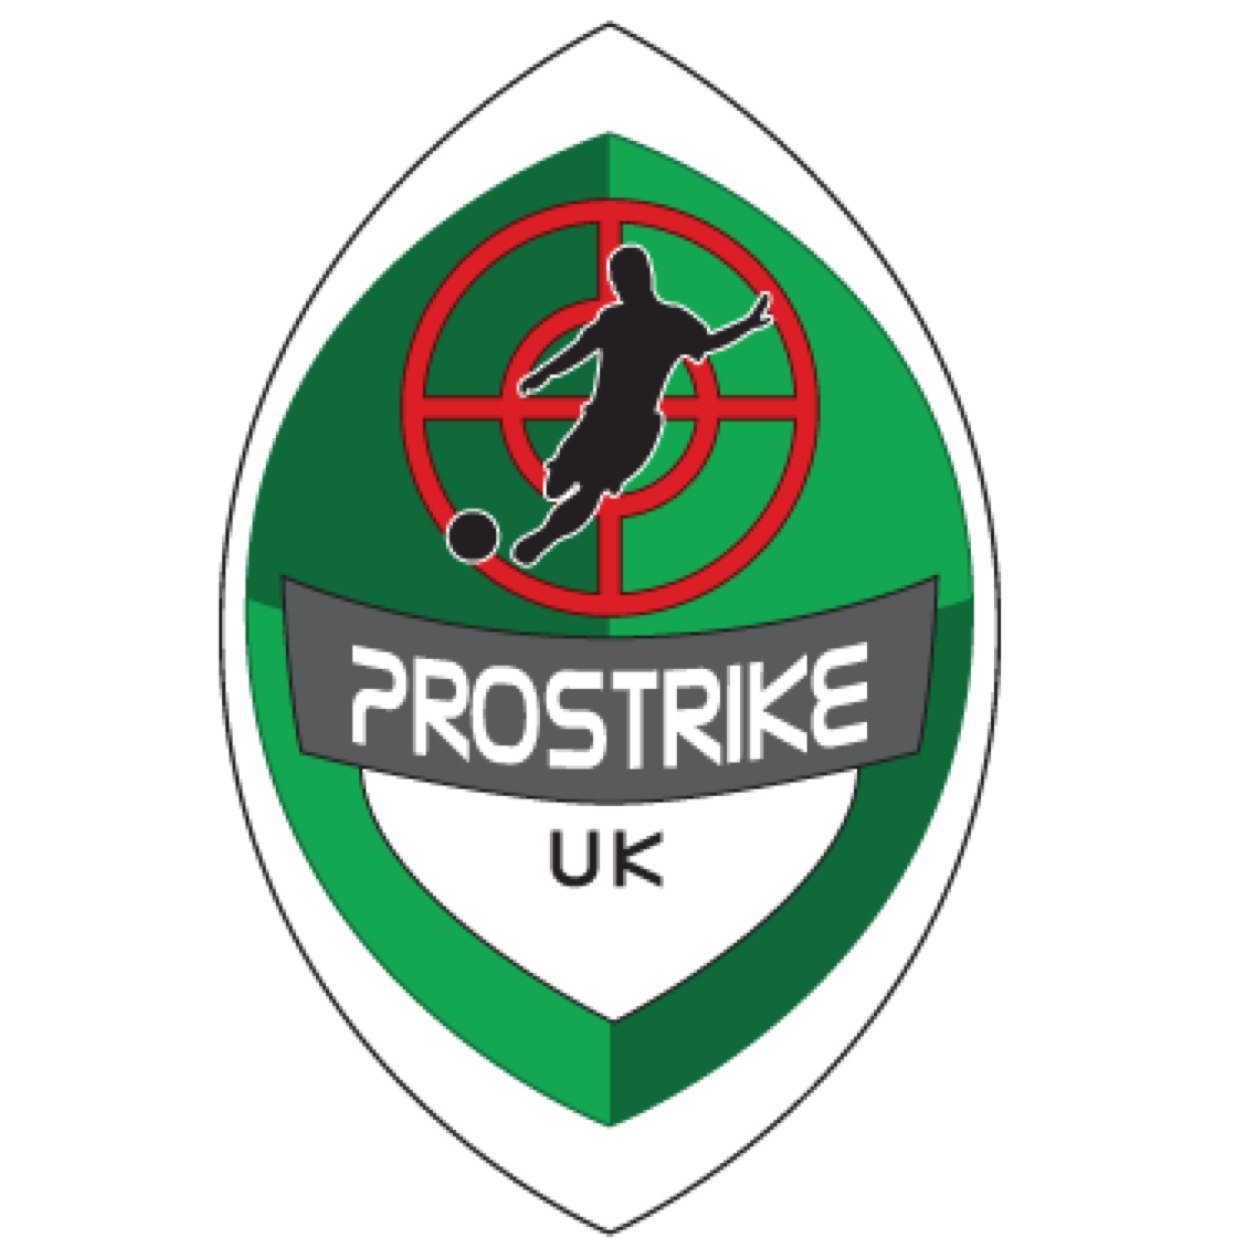 ProStrike UK offers a state of the art, interactive football experience. Earn bragging rights between your friends, football club, or family.